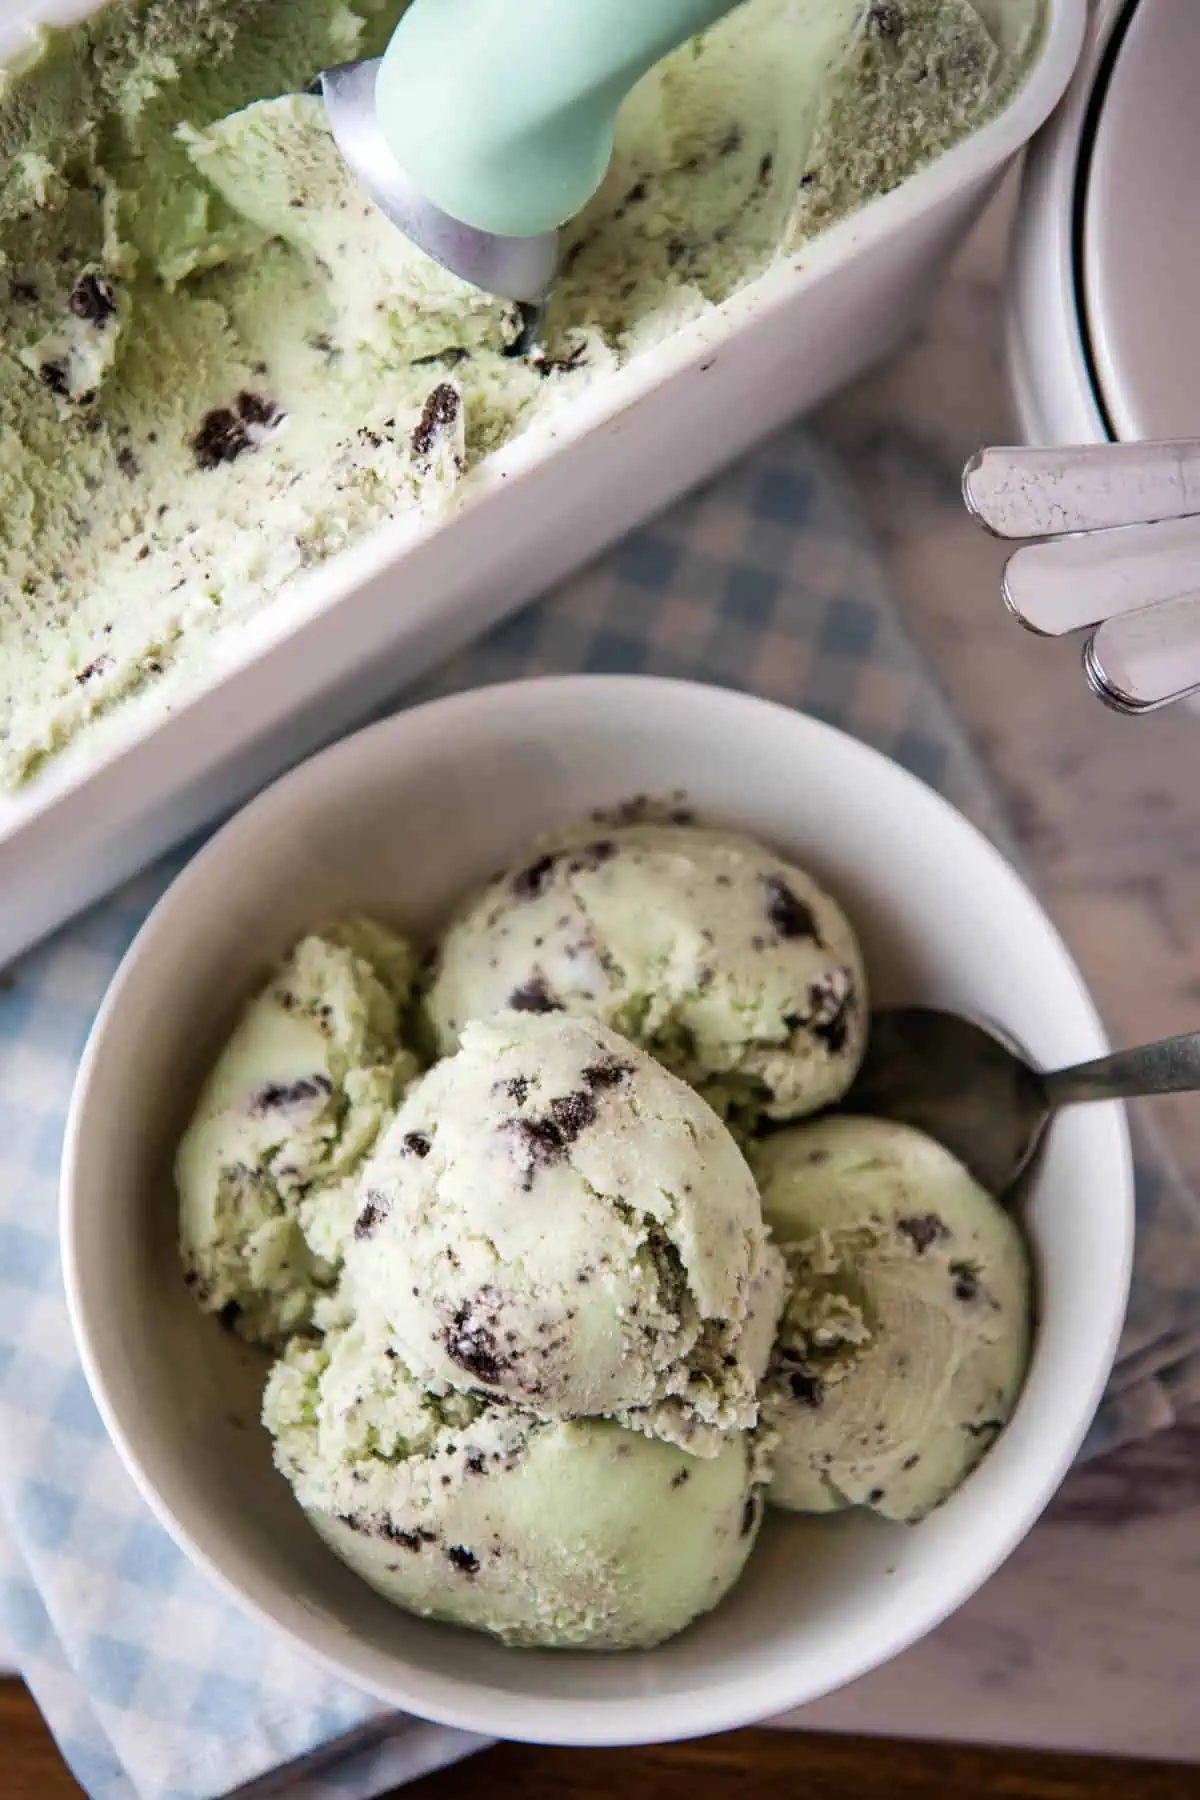 scoops of mint Oreo ice cream in white bowl with spoon next to carton of ice cream